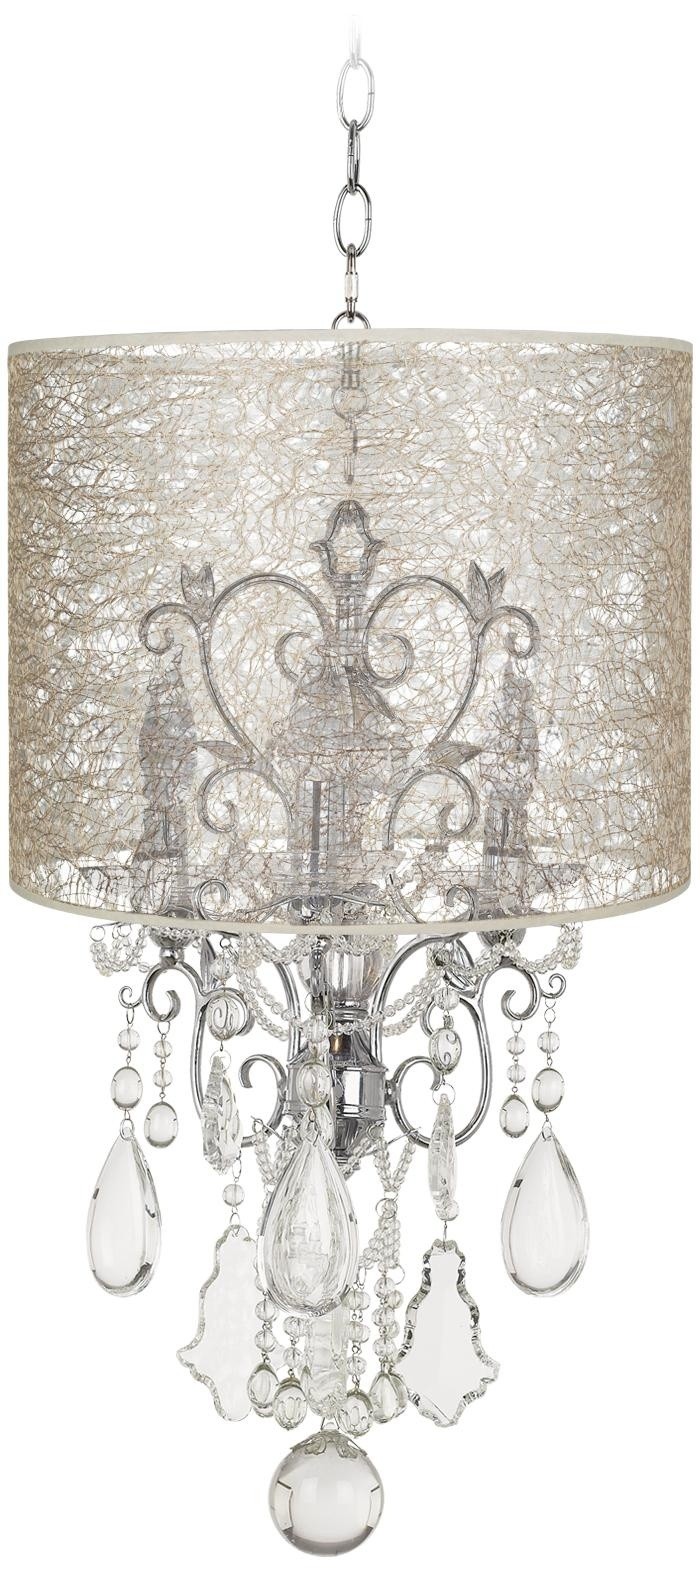 Belle of the ball designer lace shade mini chandelier